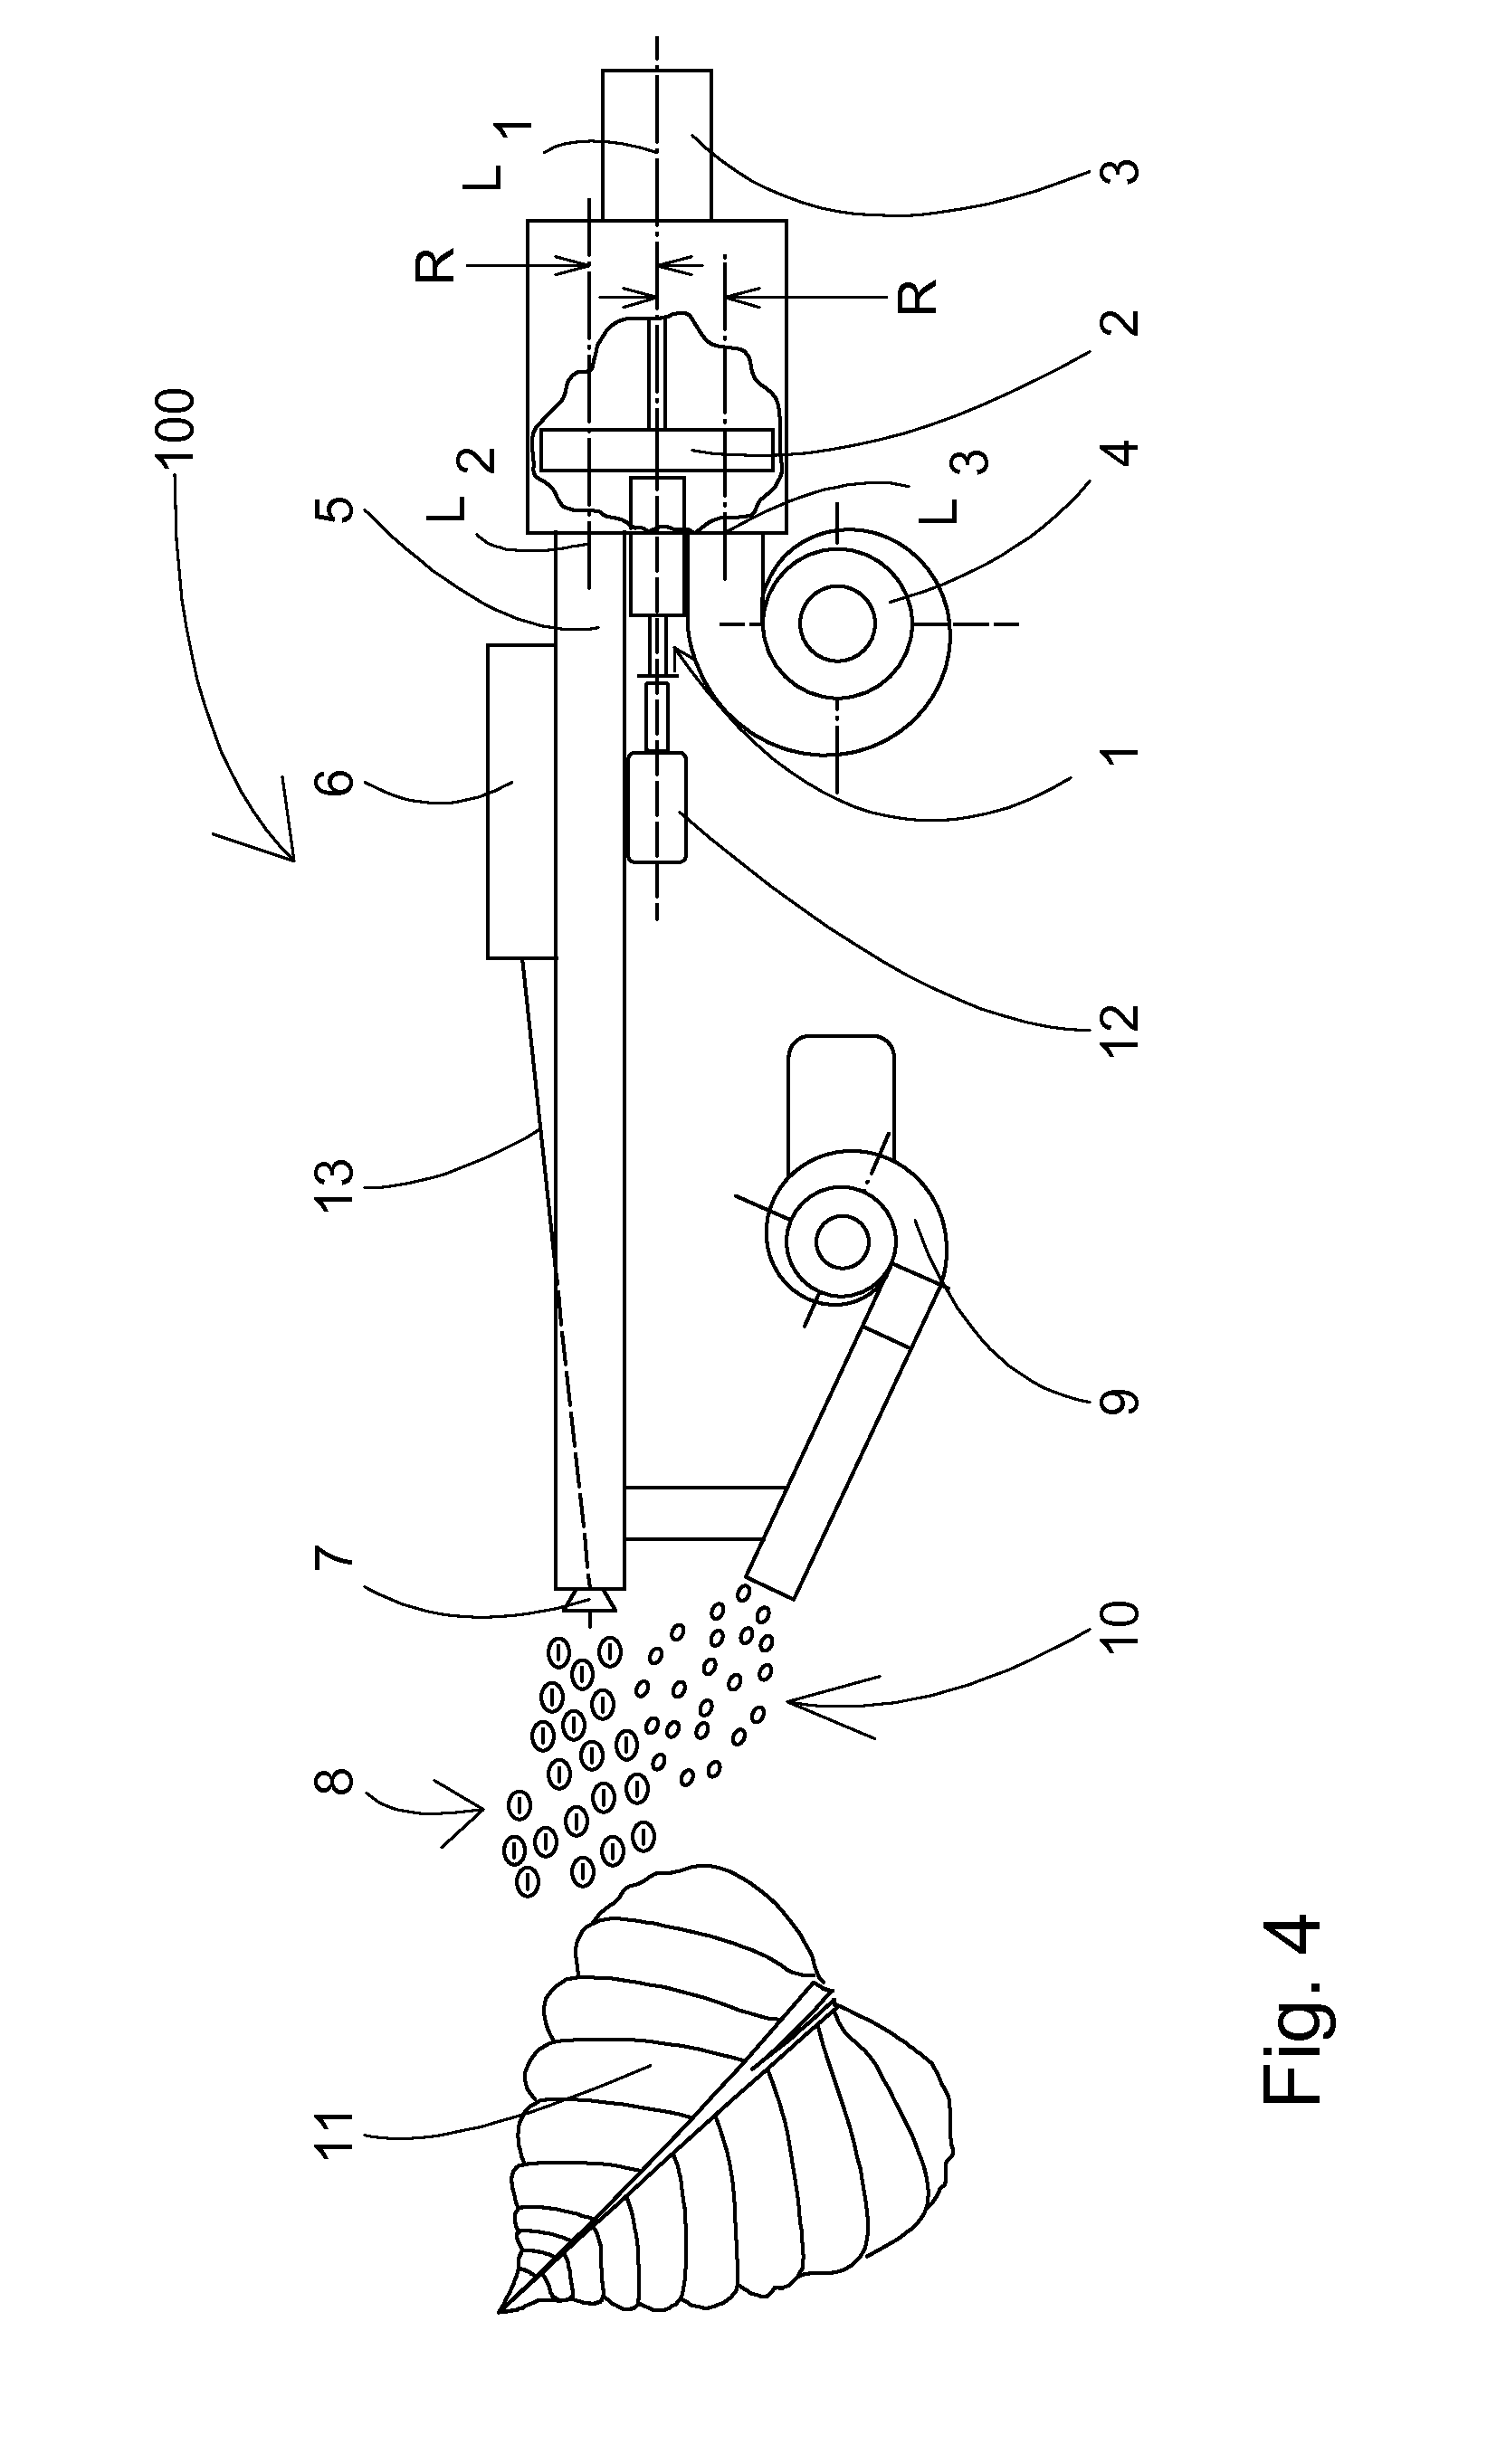 Device and method for pollen application for enhancing biological control